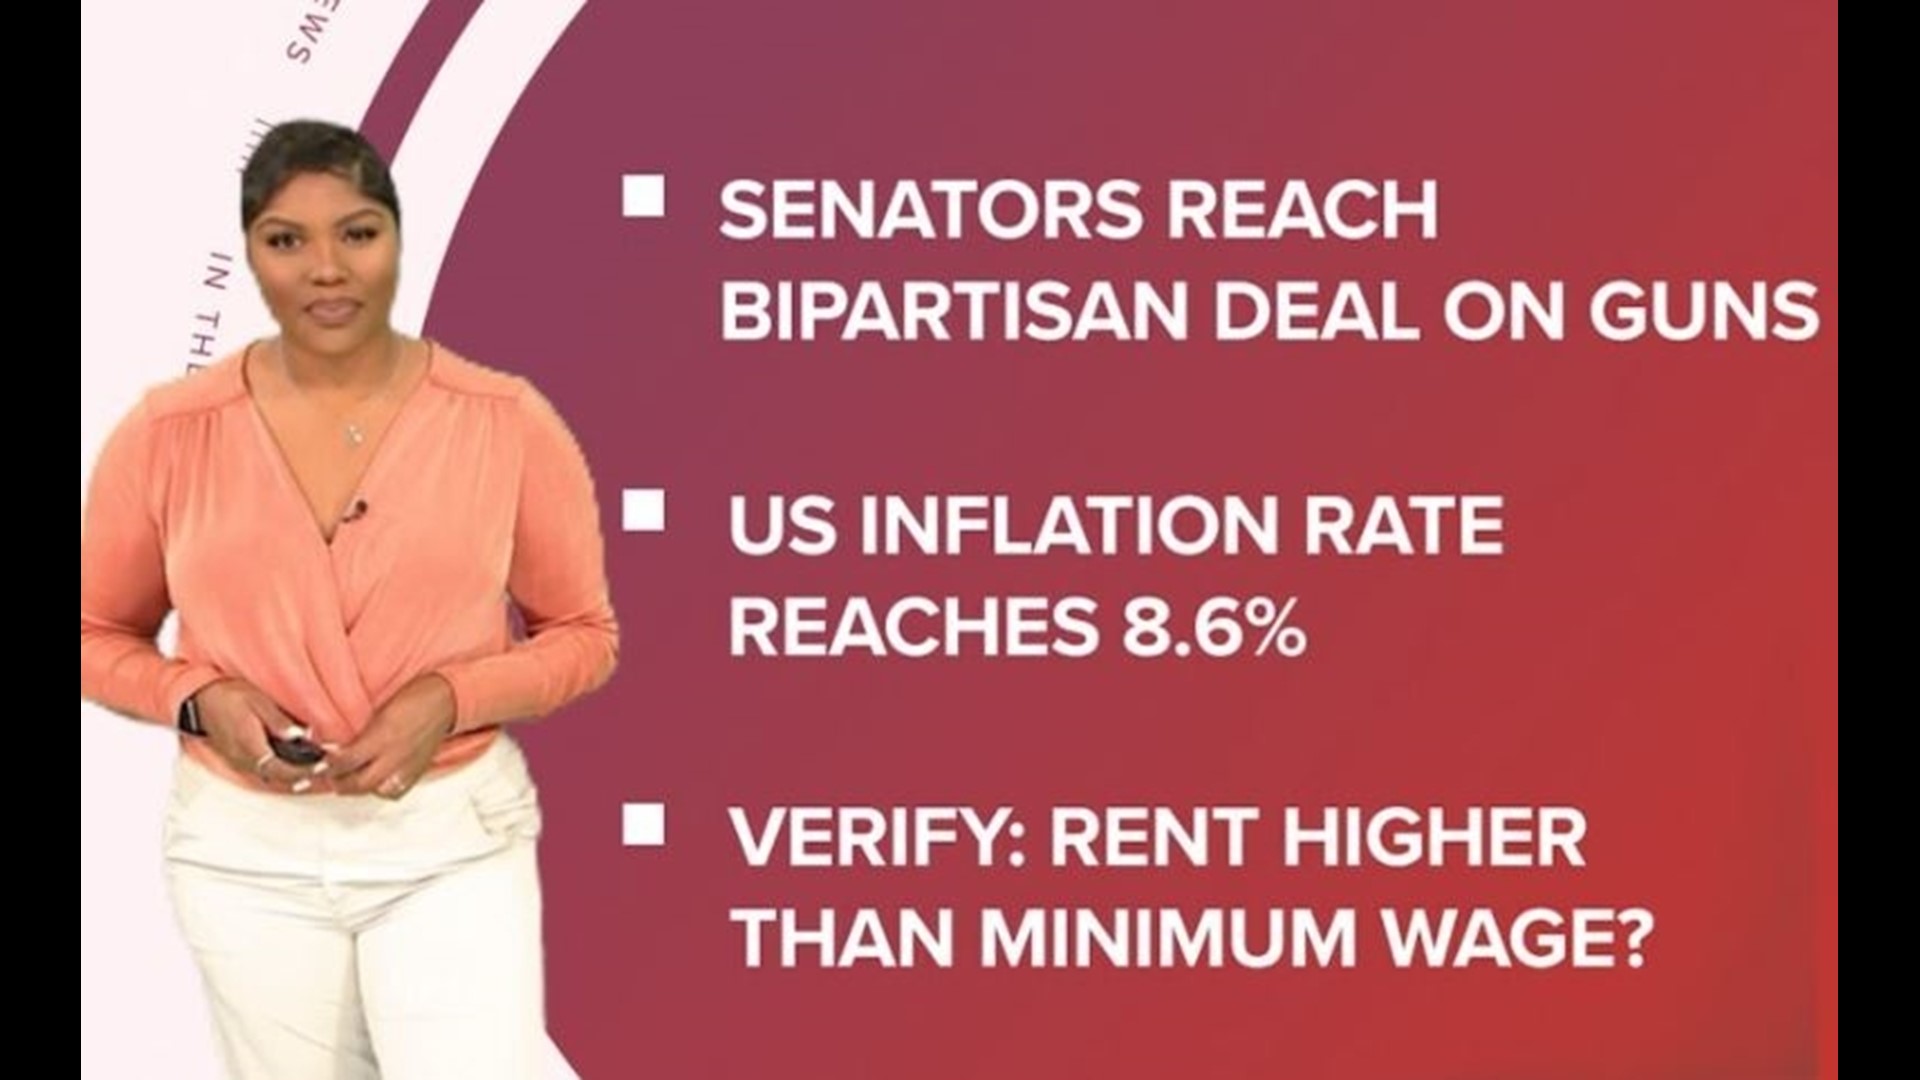 A look at what is happening across the U.S. as the inflation rate hits a four-year high, Senators reach a bipartisan gun deal and the LIV golf tour begins